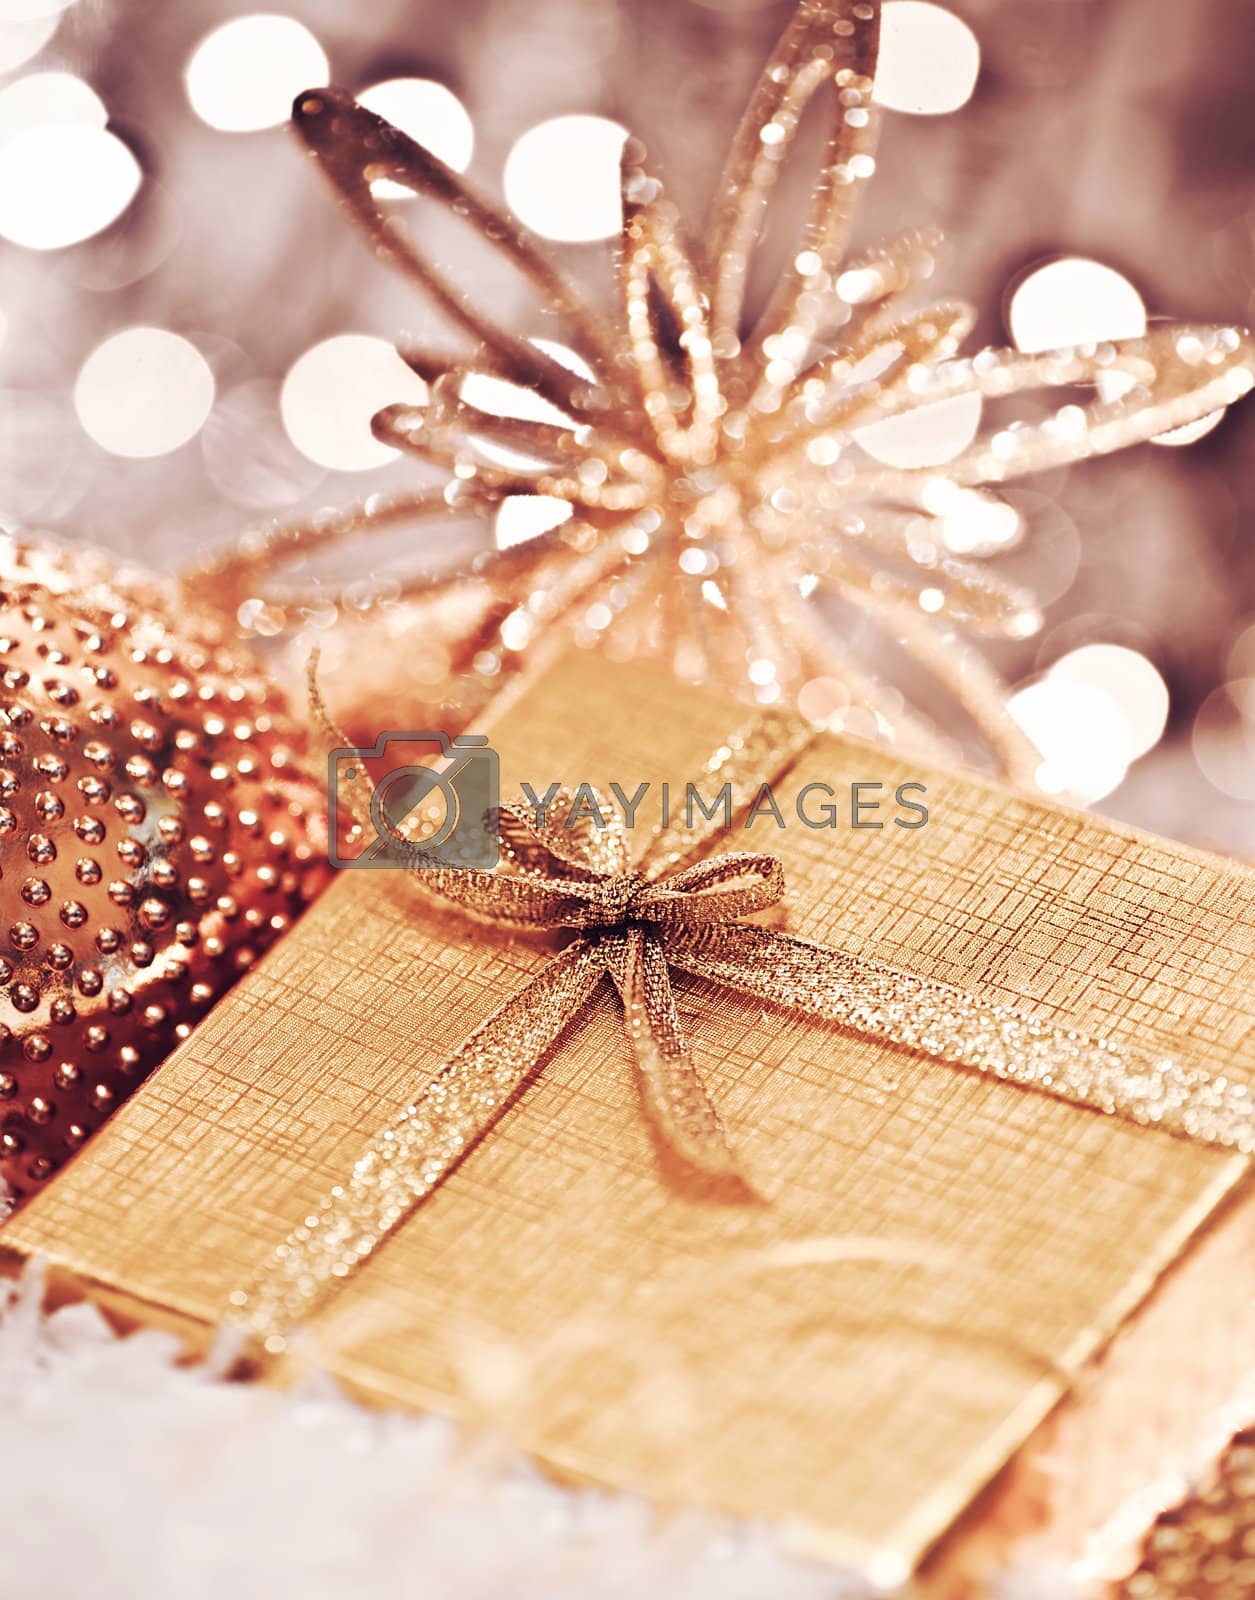 Royalty free image of Golden Christmas gift with baubles decorations by Anna_Omelchenko